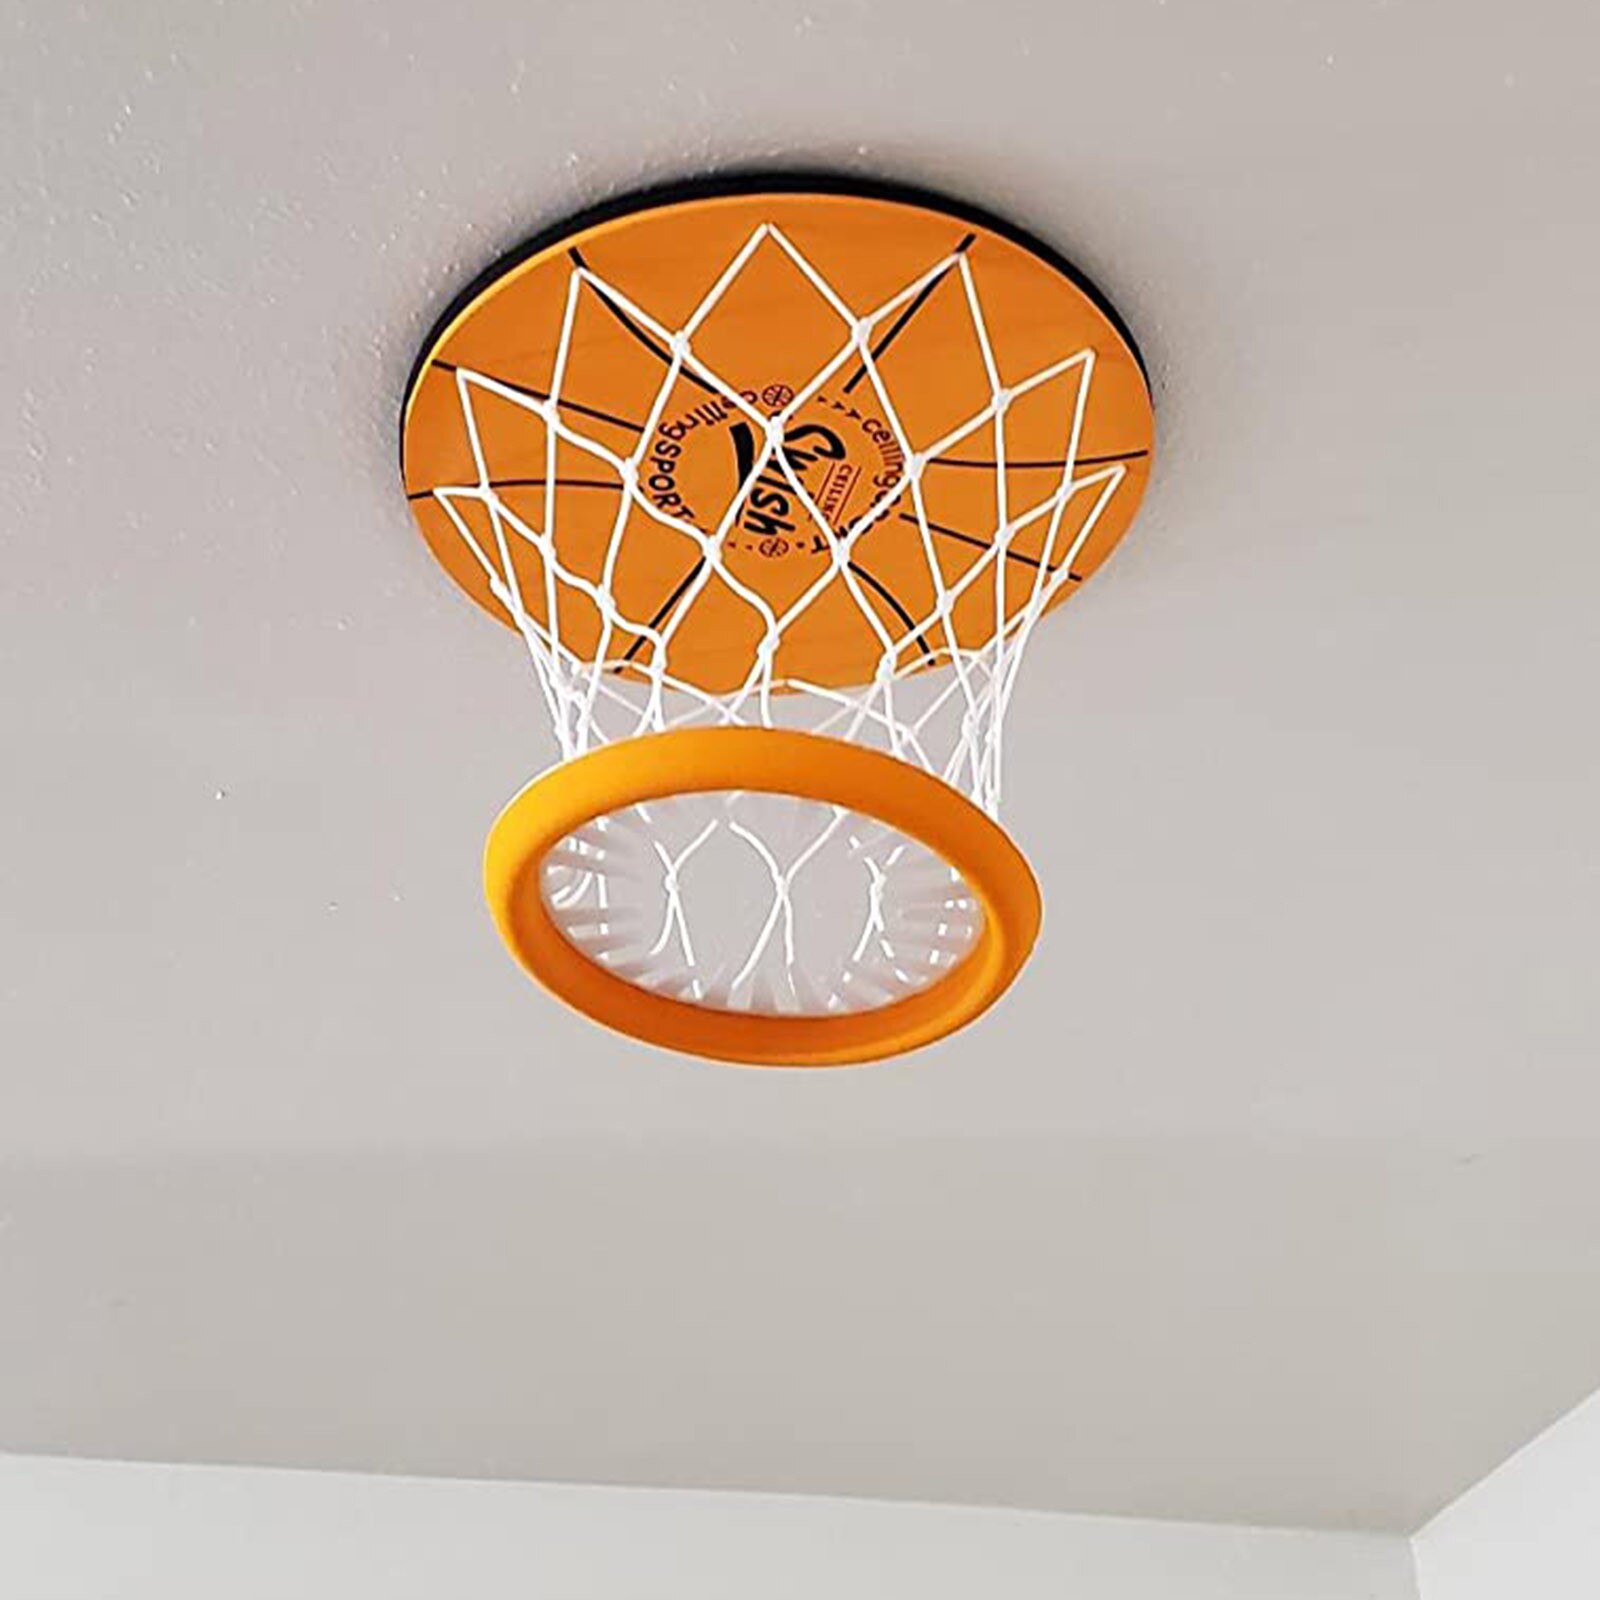 Ceiling Sport Indoor Mini Basketball Hoop For Kids Toy Game Shooting Toy Bedroom Parent-child Game Educational Toys D9#